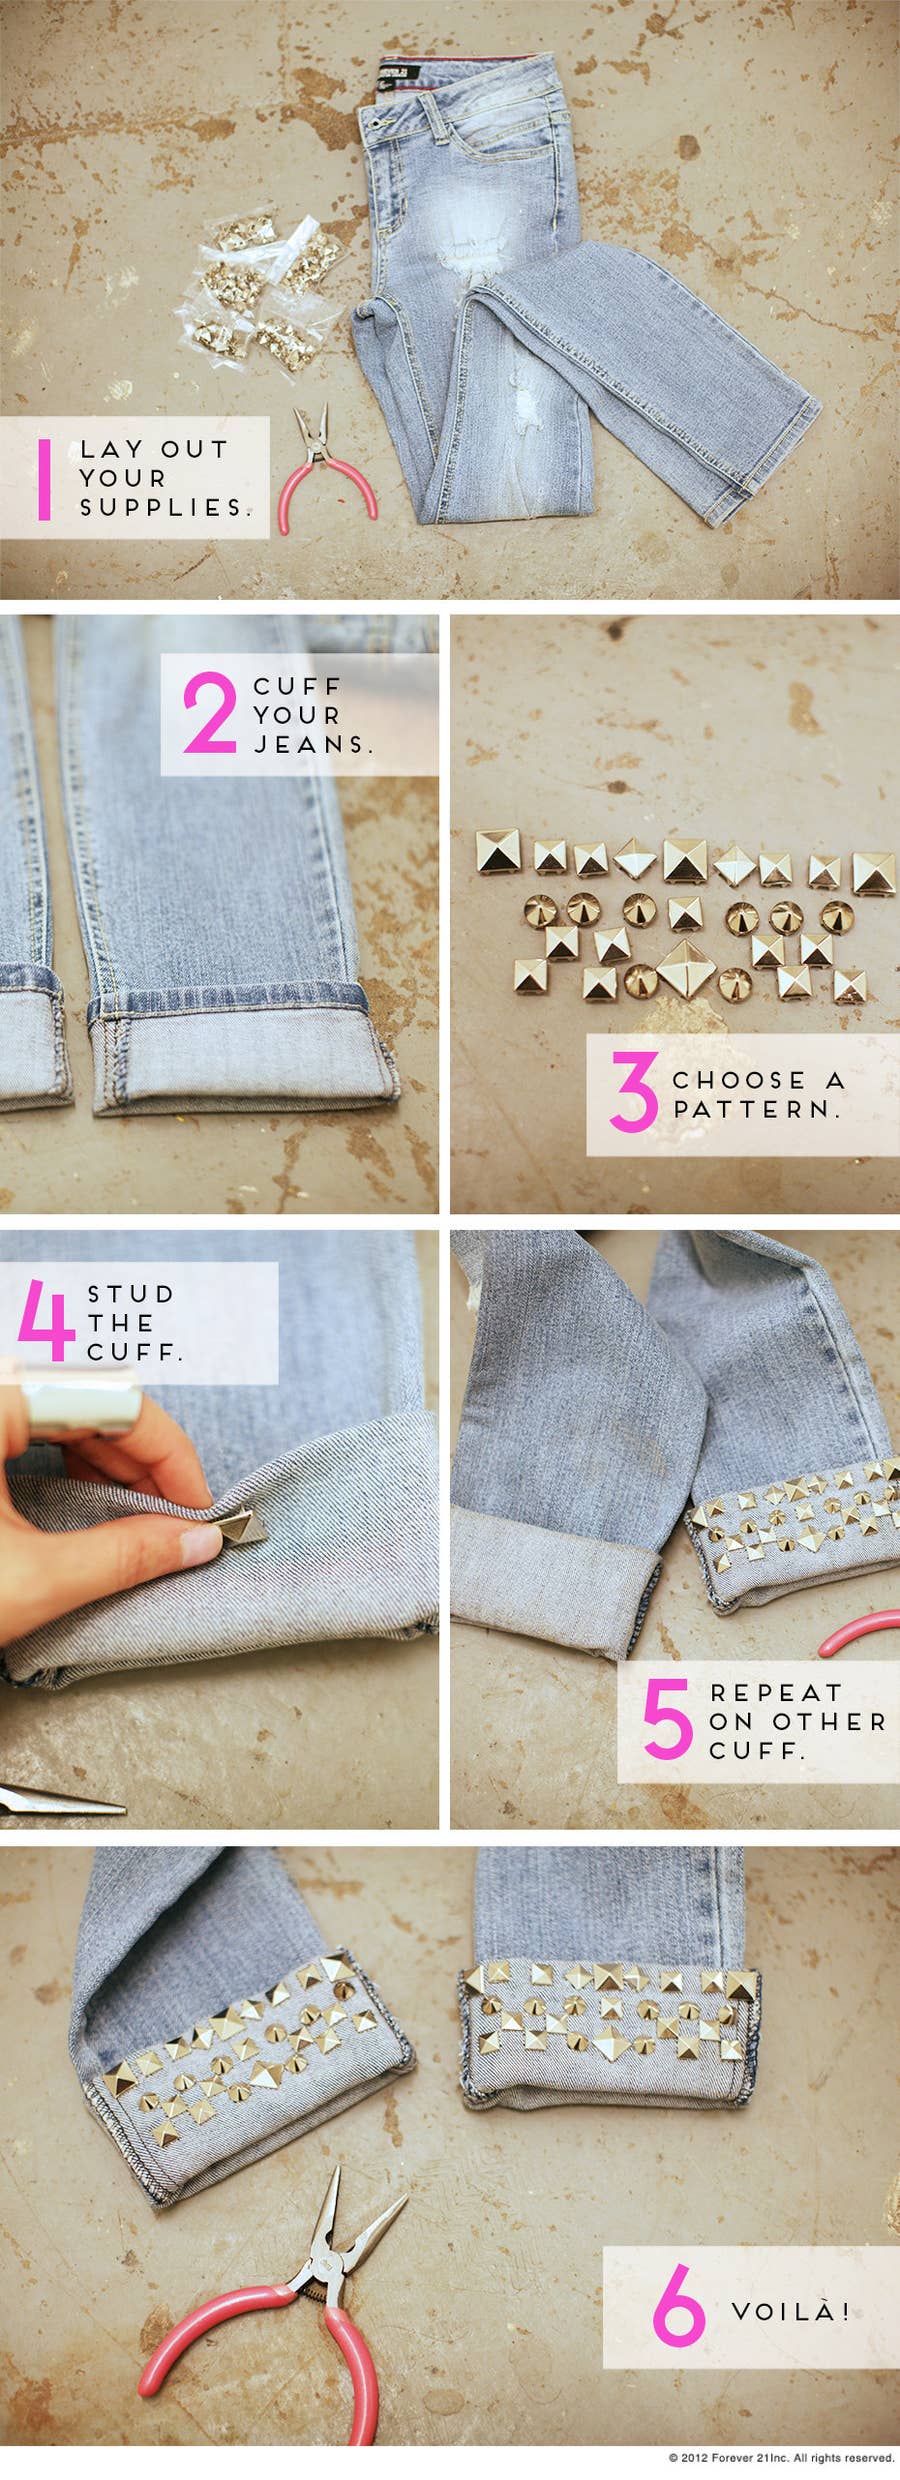 41 Awesomely Easy No-Sew DIY Clothing Hacks